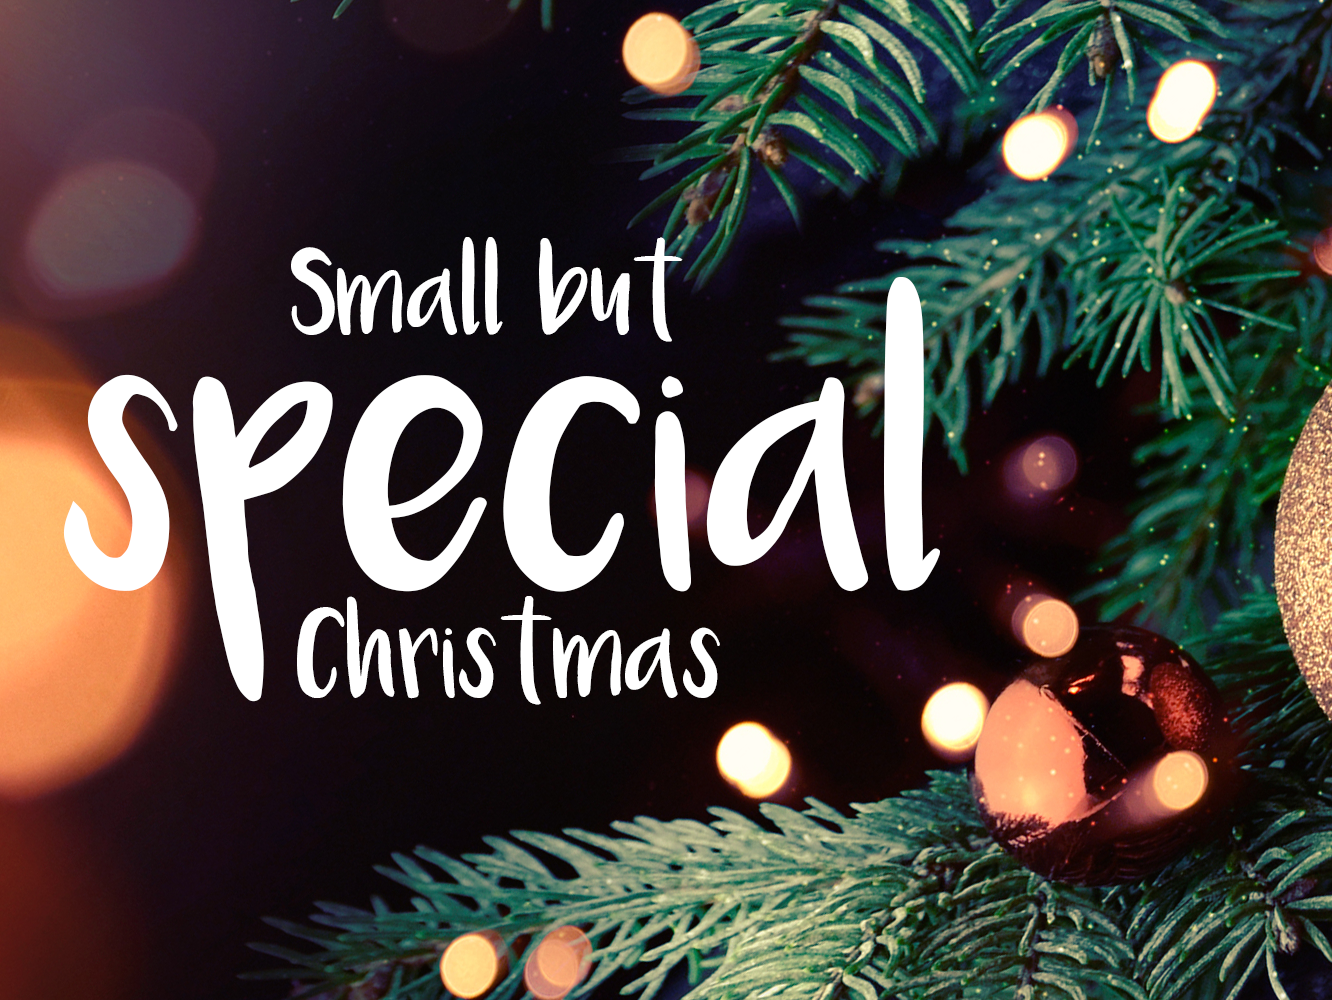 Have yourself a small but special Christmas